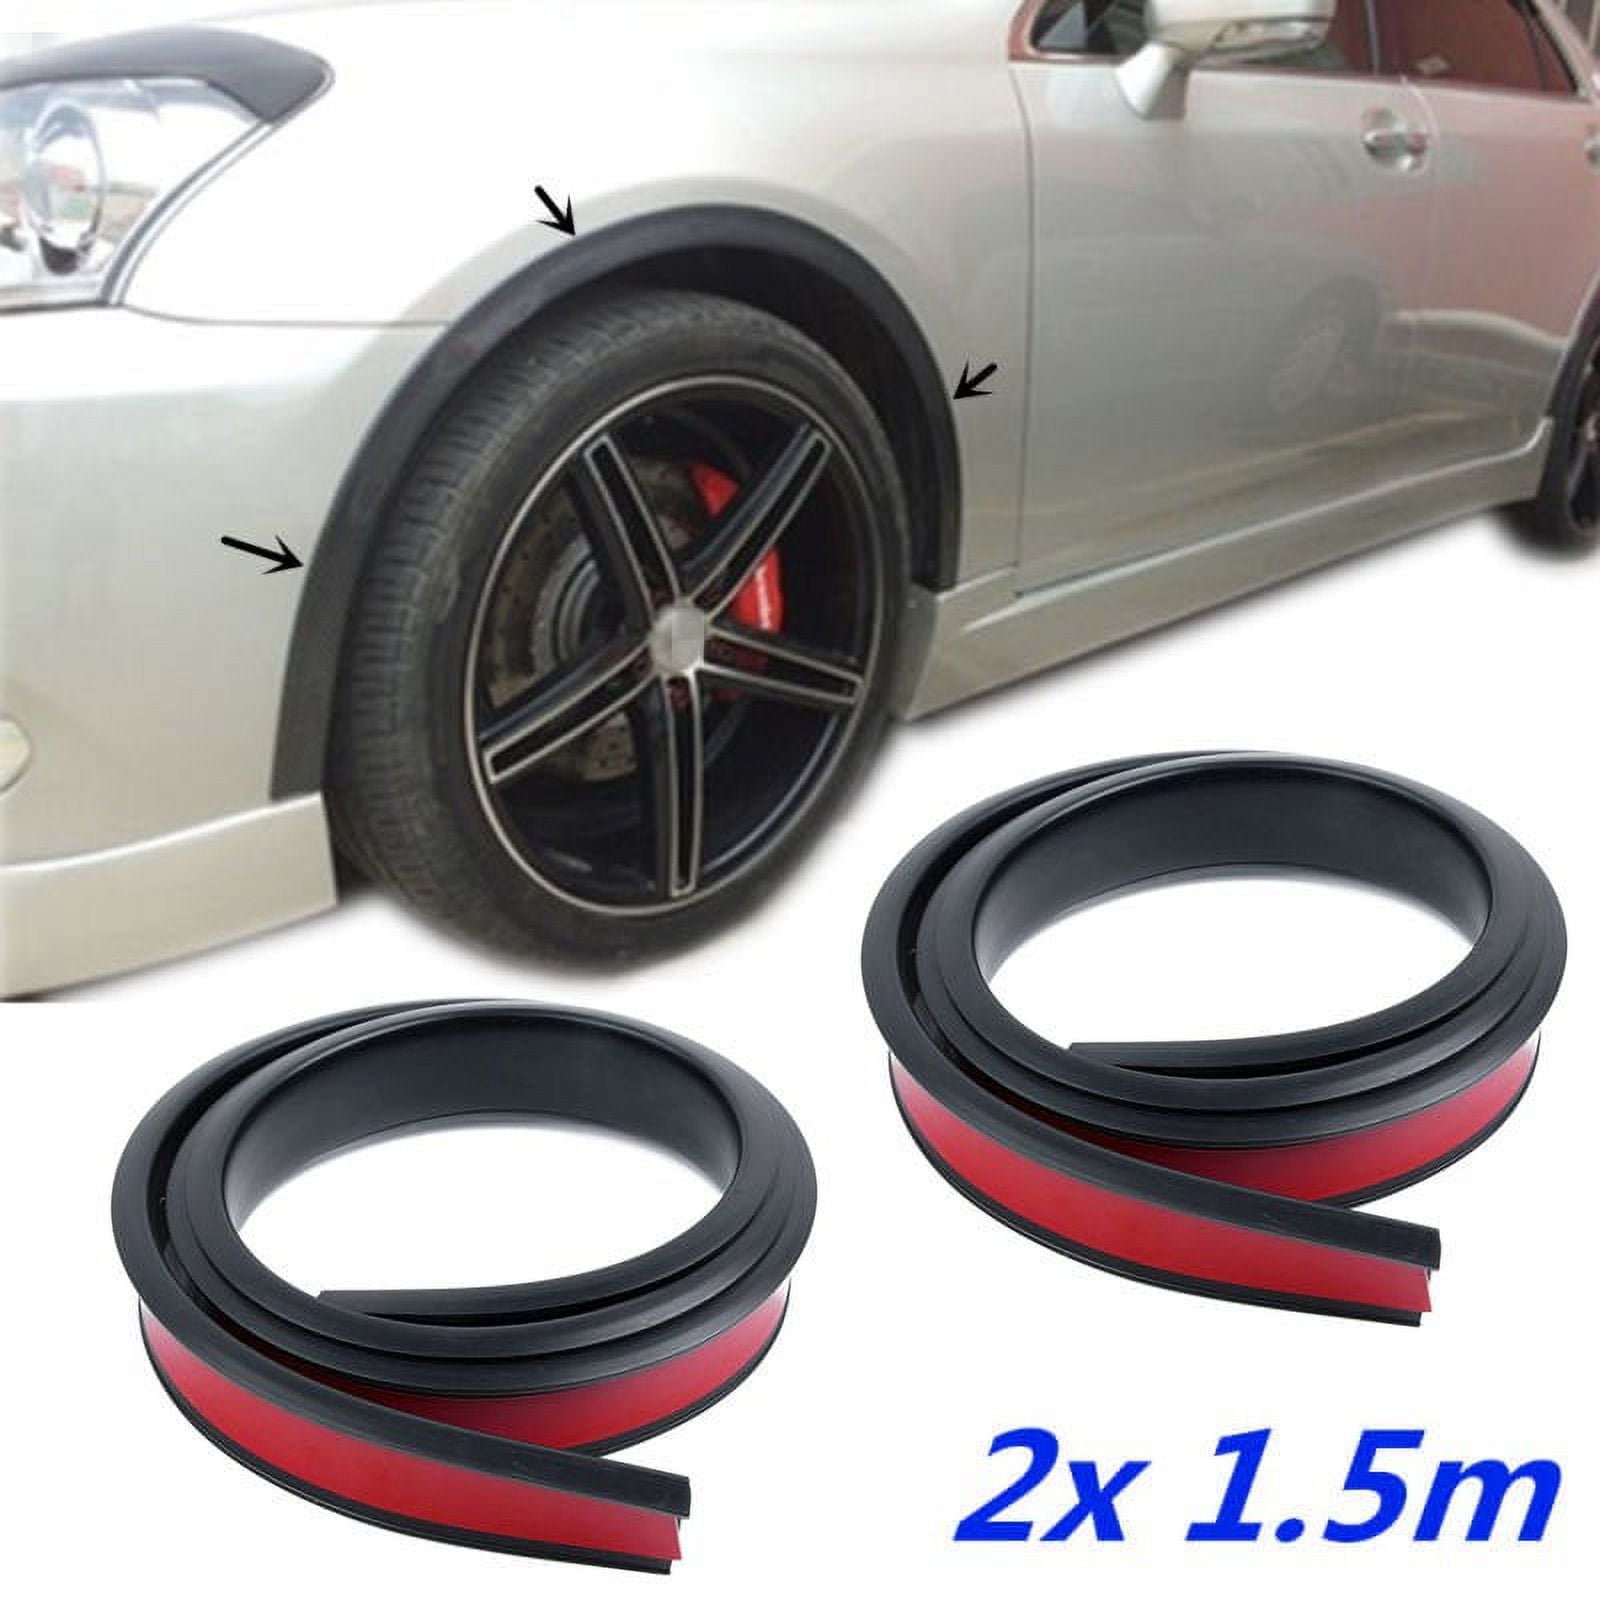 Cheap Universal Rubber Car Seal Strip Fender Flares Arches Wing